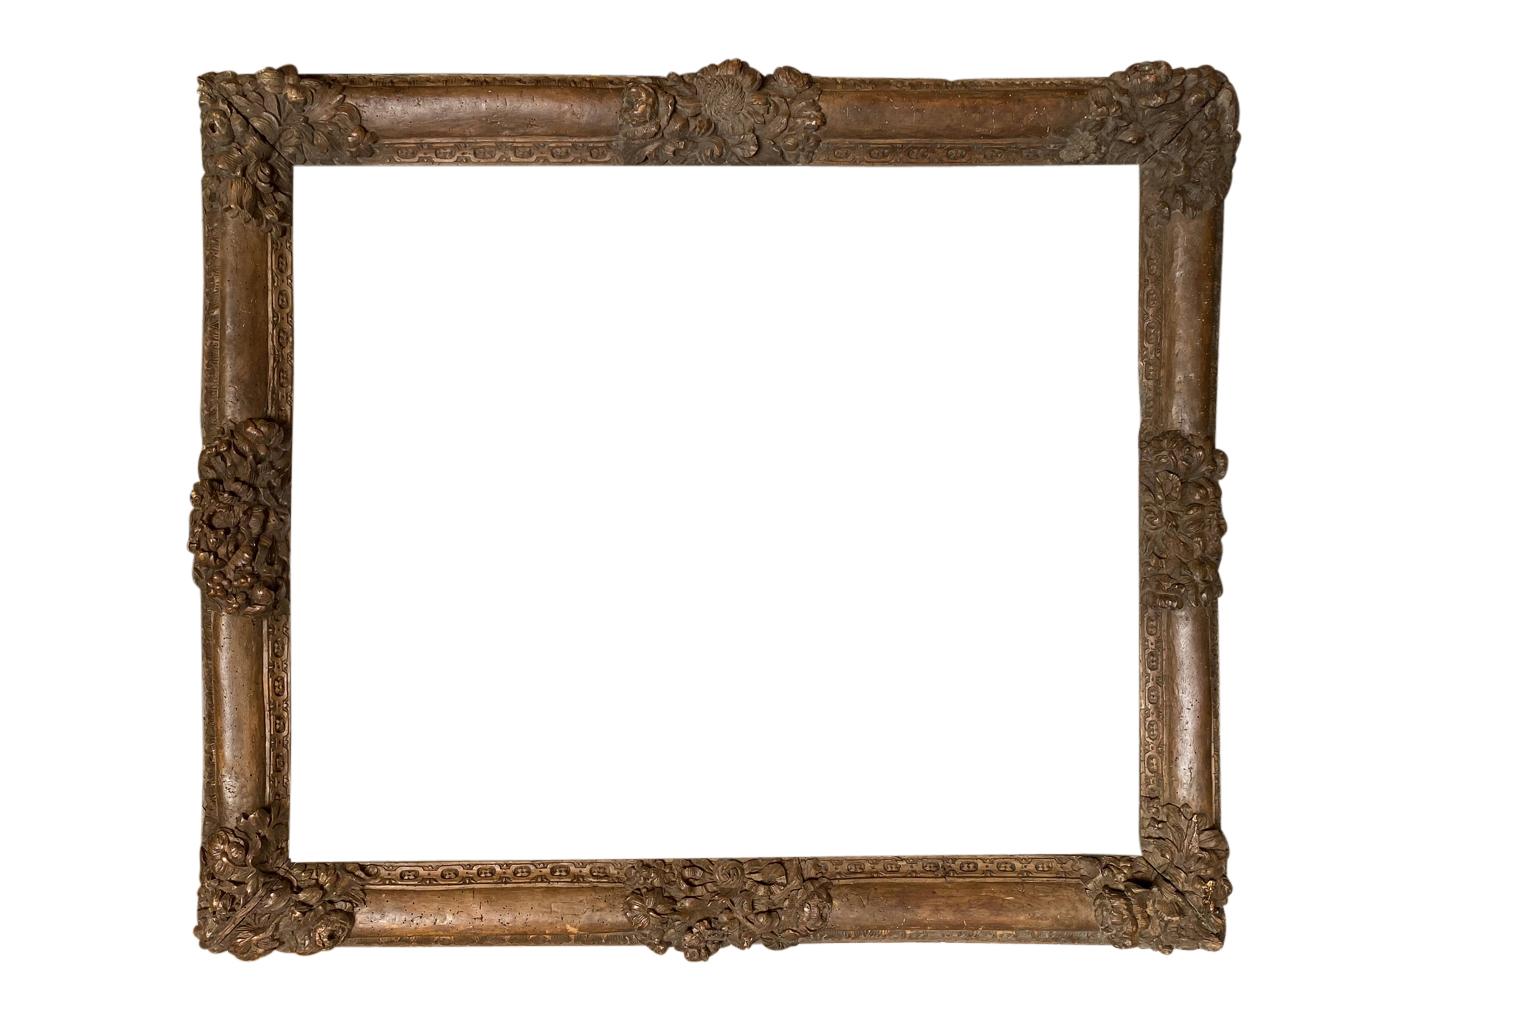 A very striking period Louis XIII frame from the Provence region of France. Beautifully crafted from carved walnut. Lovely patina. Perfect to house a piece of art or to convert into a mirror.